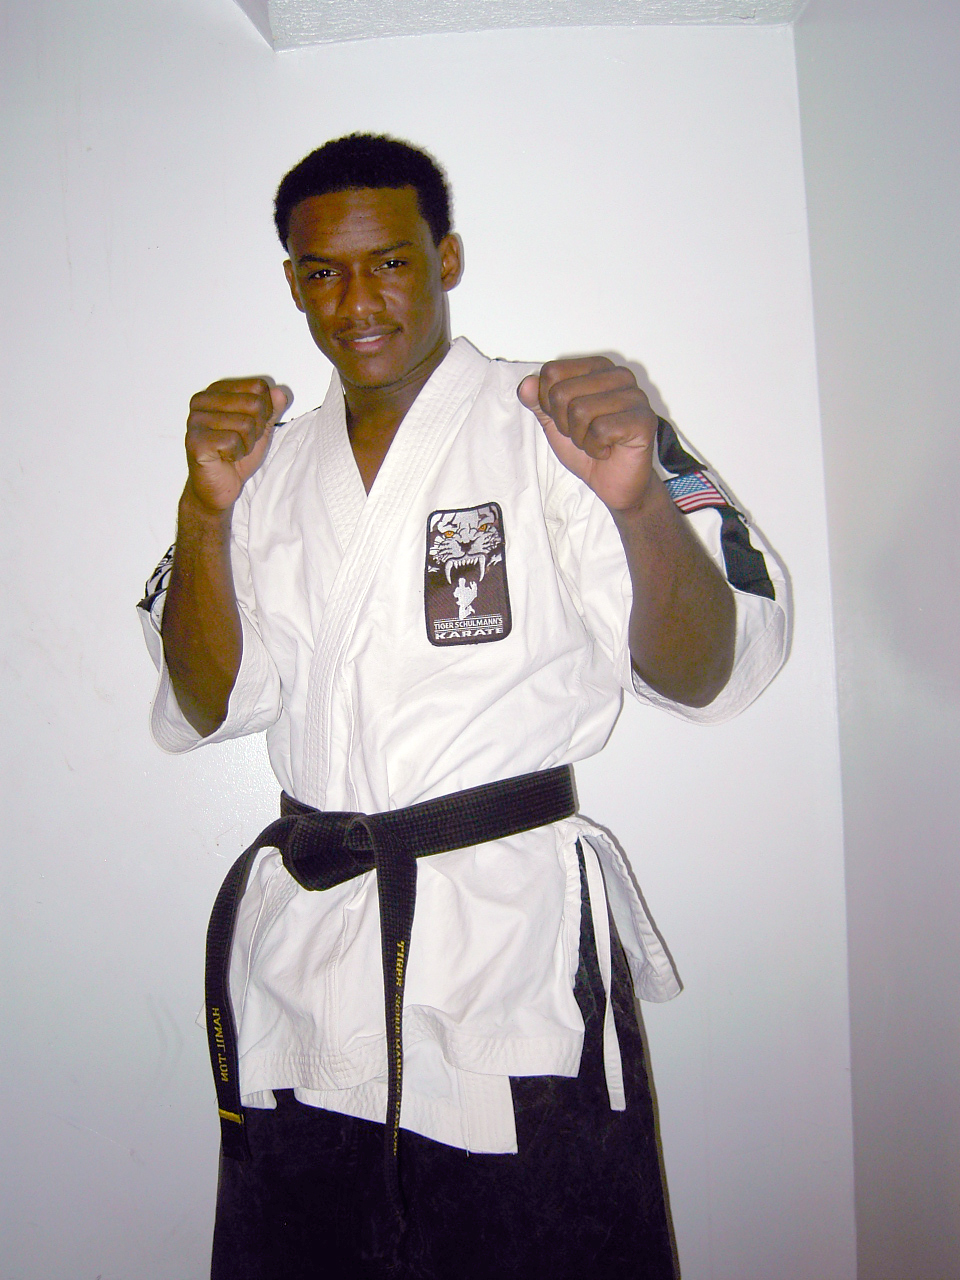 Hamilton found direction for his life while earning a Black Belt at Tiger Schulmann's.